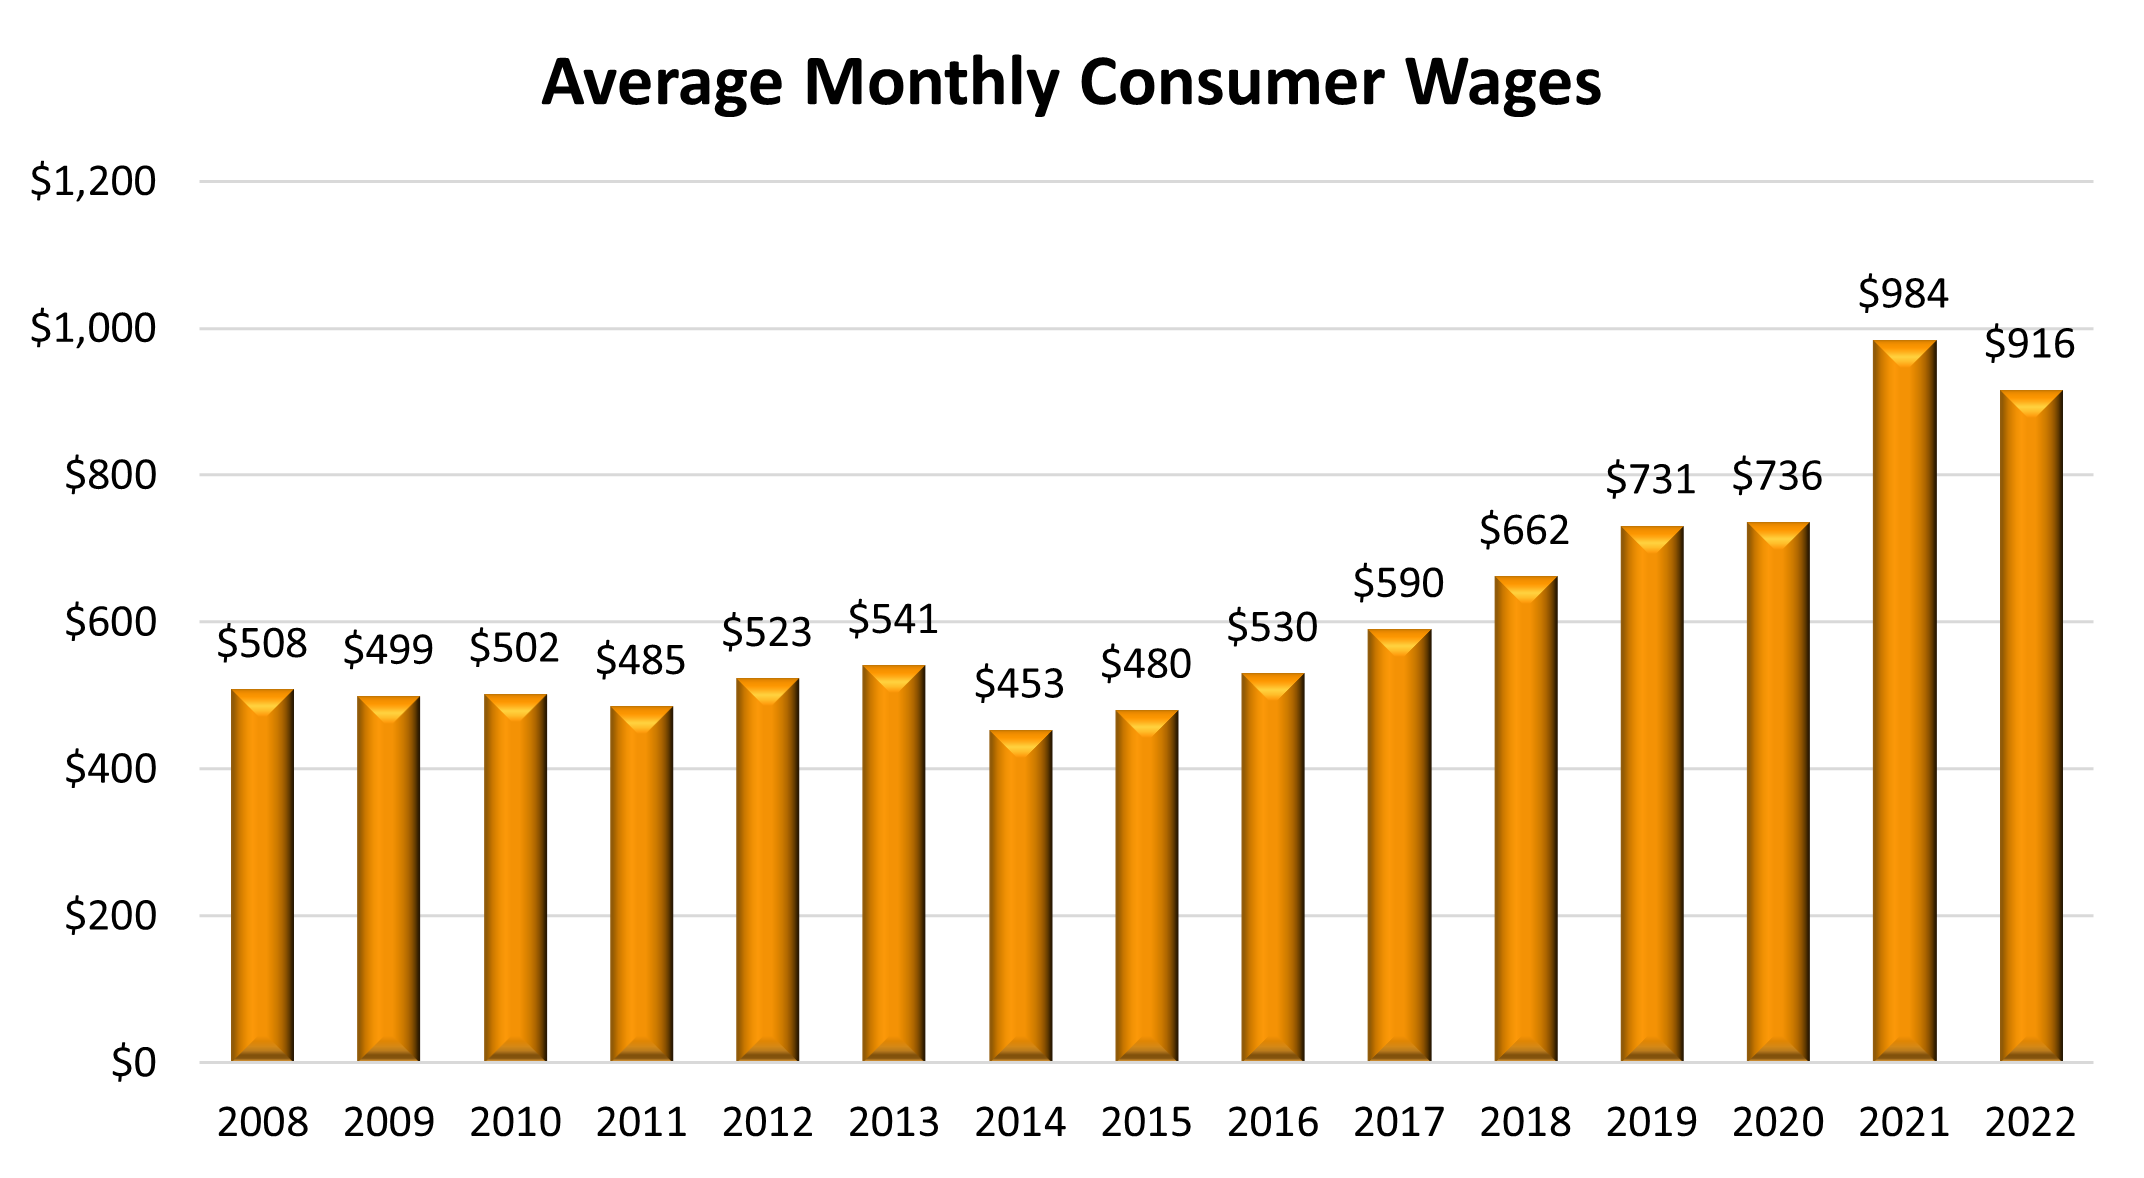 Average Monthly Consumer Wages Bar Graph 2008: $508 2009: $499 2010: $502 2011: $485 2012: $523 2013: $541 2014: $453 2015: $480 2016: $530 2017: $590 2018: $662 2019: $731 2020: $736 2021: $984 2022: $916